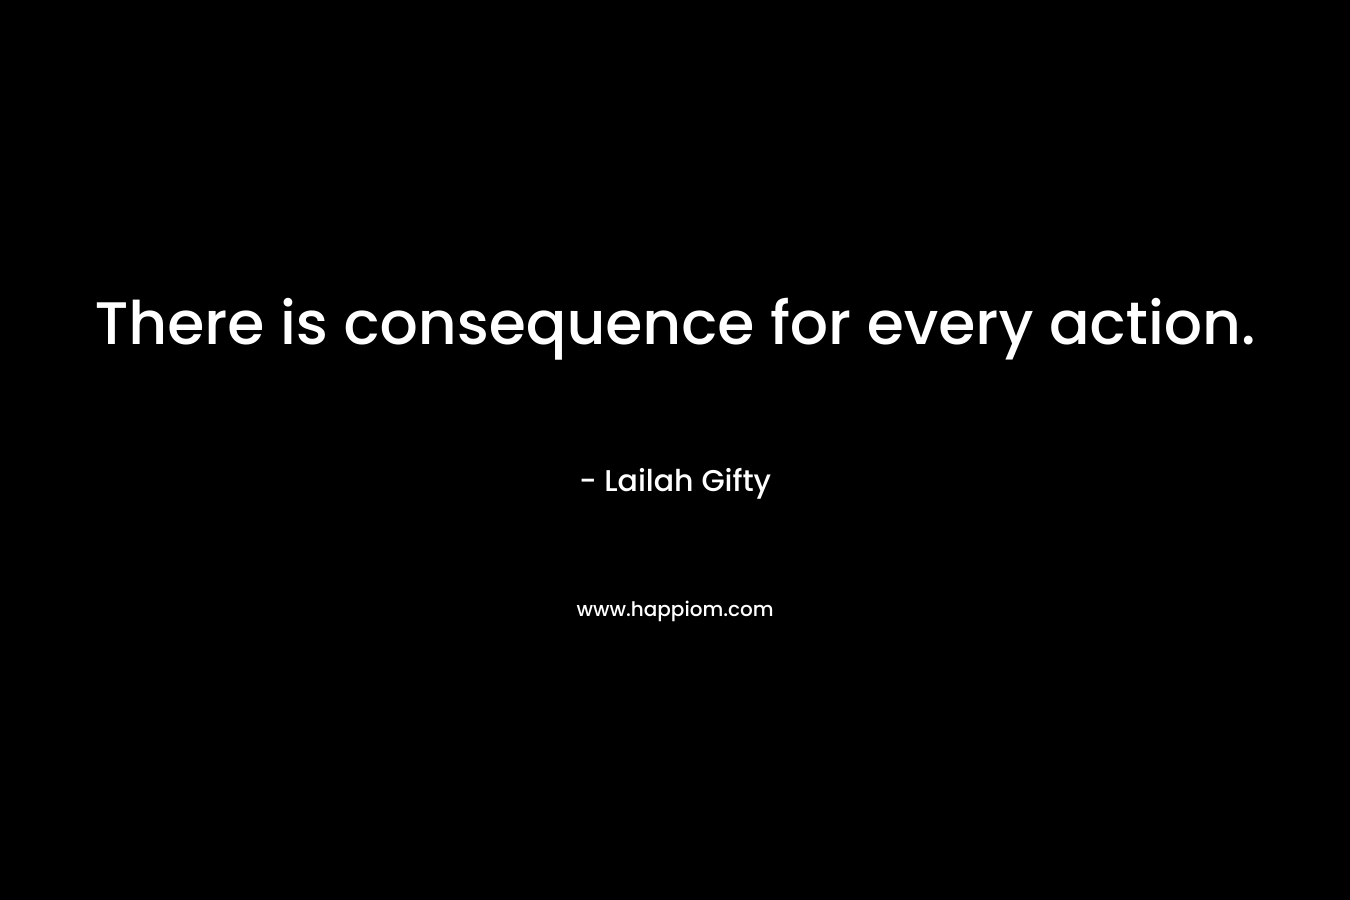 There is consequence for every action. – Lailah Gifty